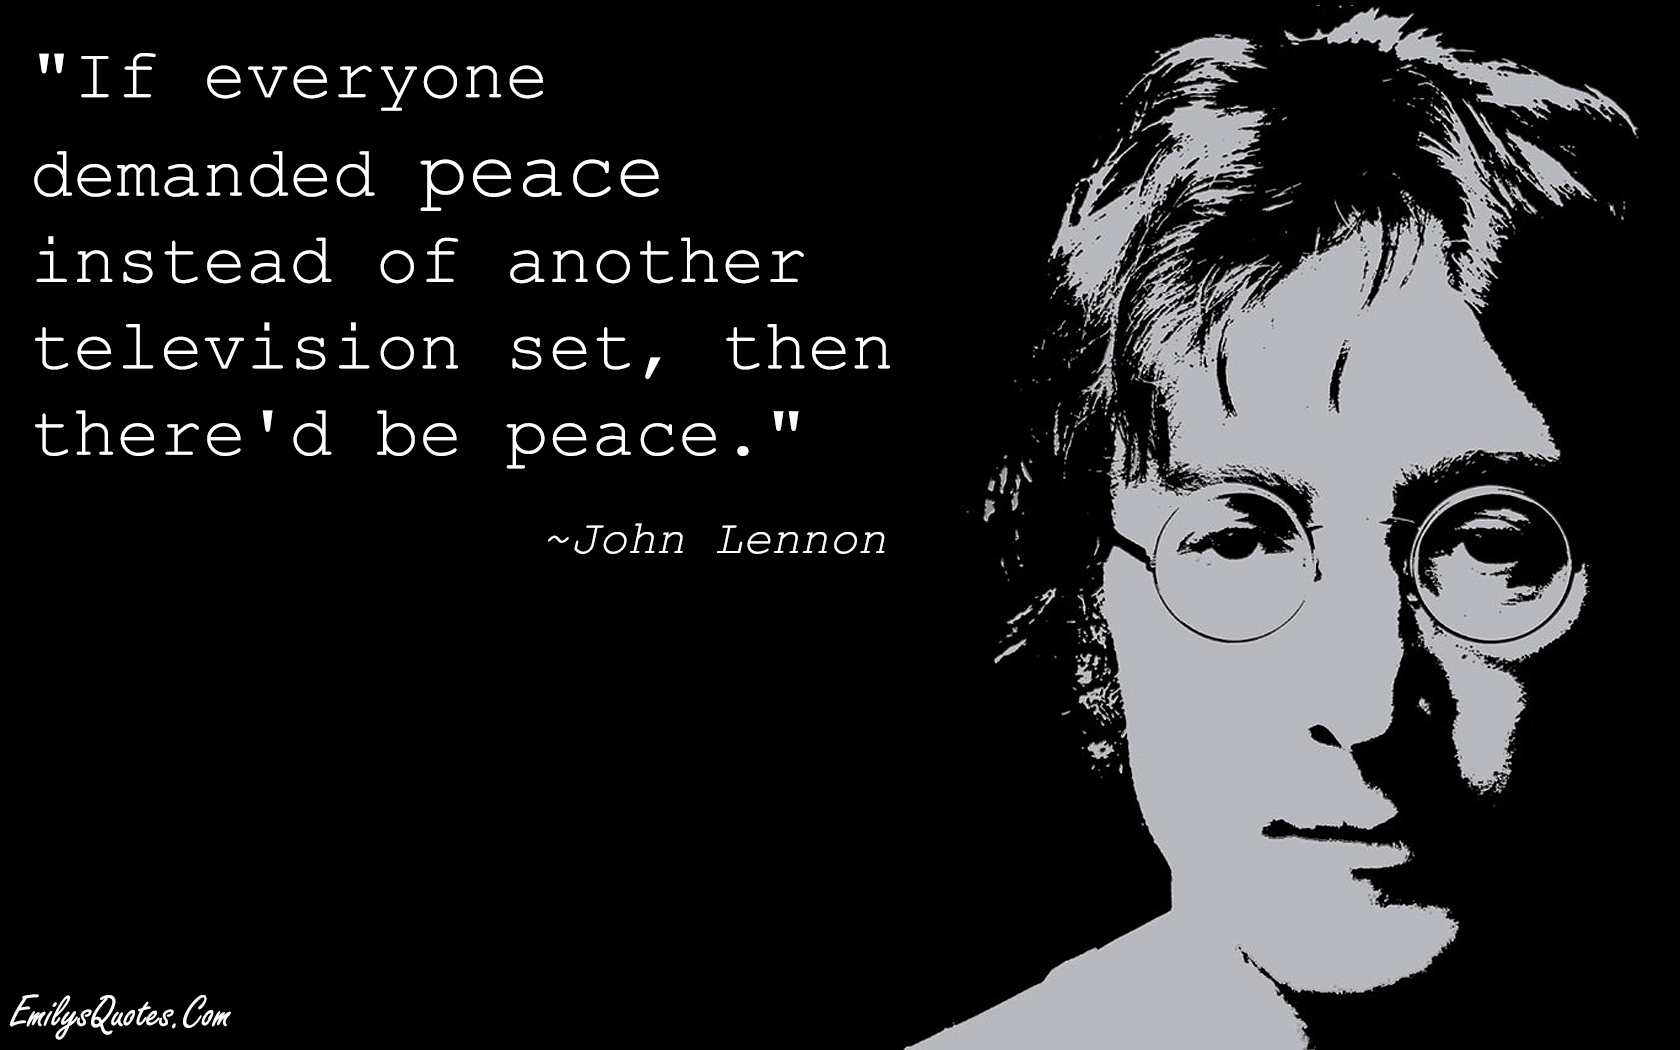 If everyone demanded peace instead of another television set, then there’d be peace